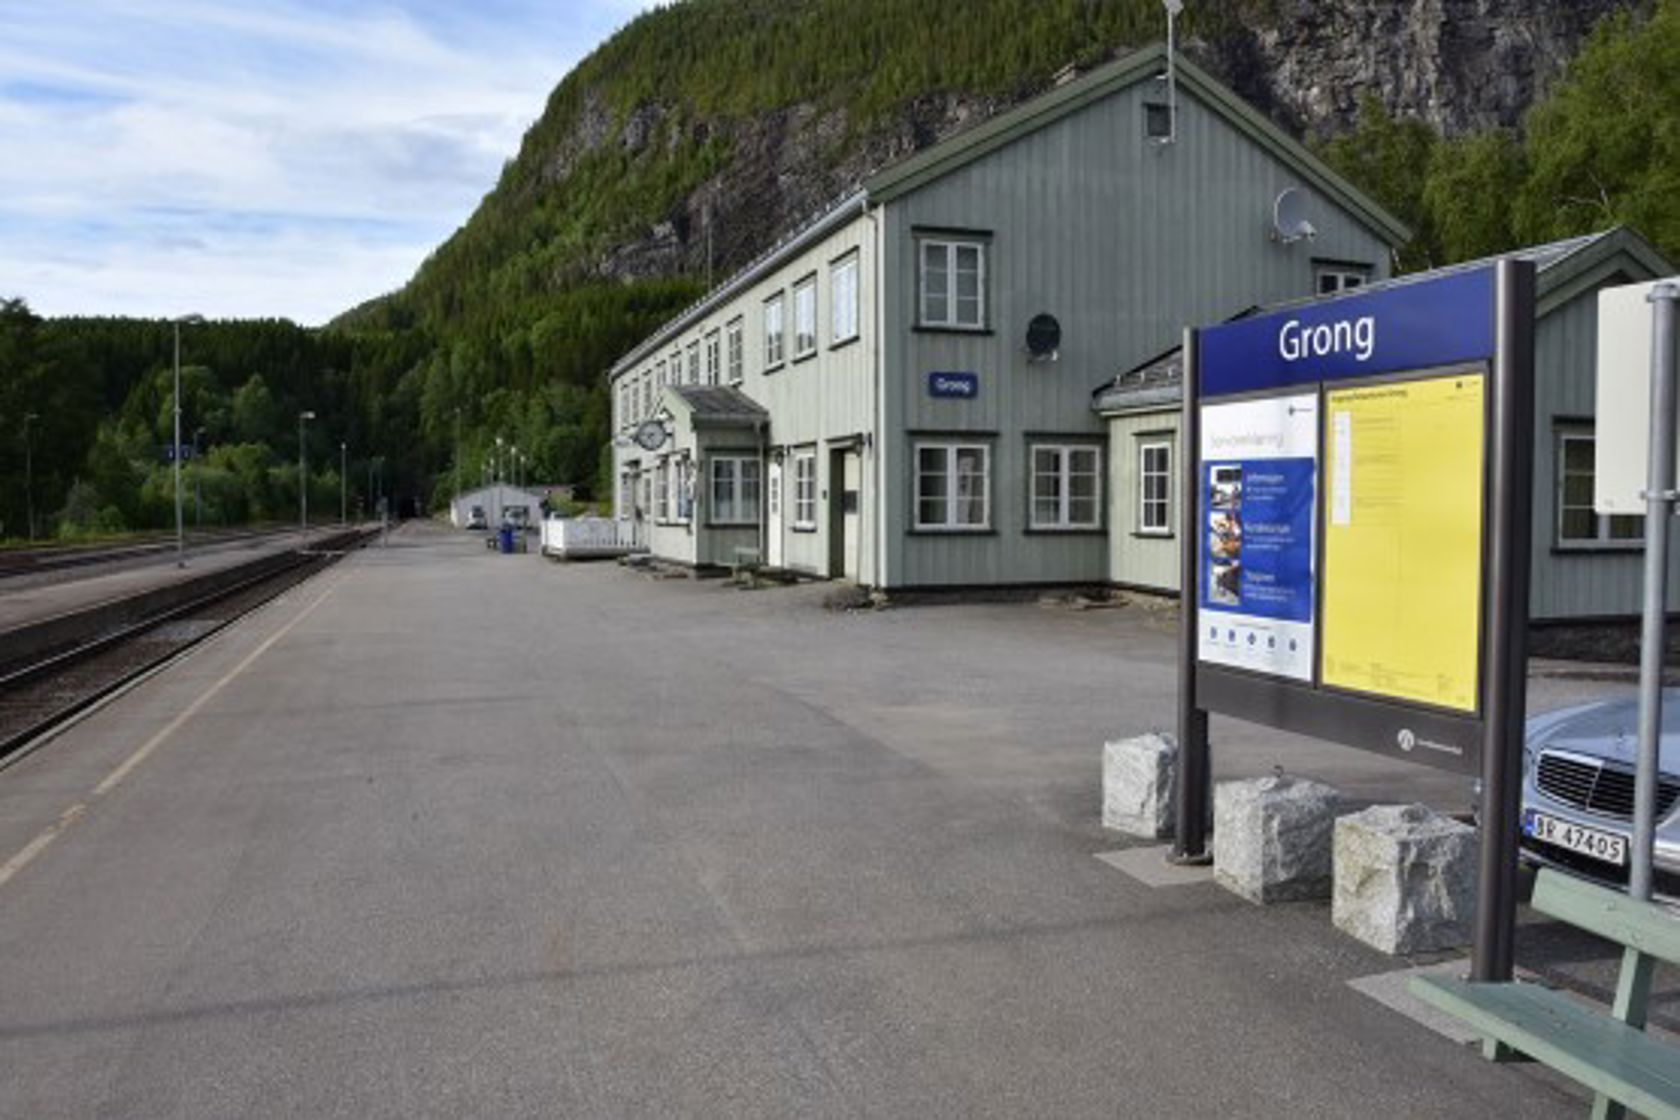 Exterior view of Grong station